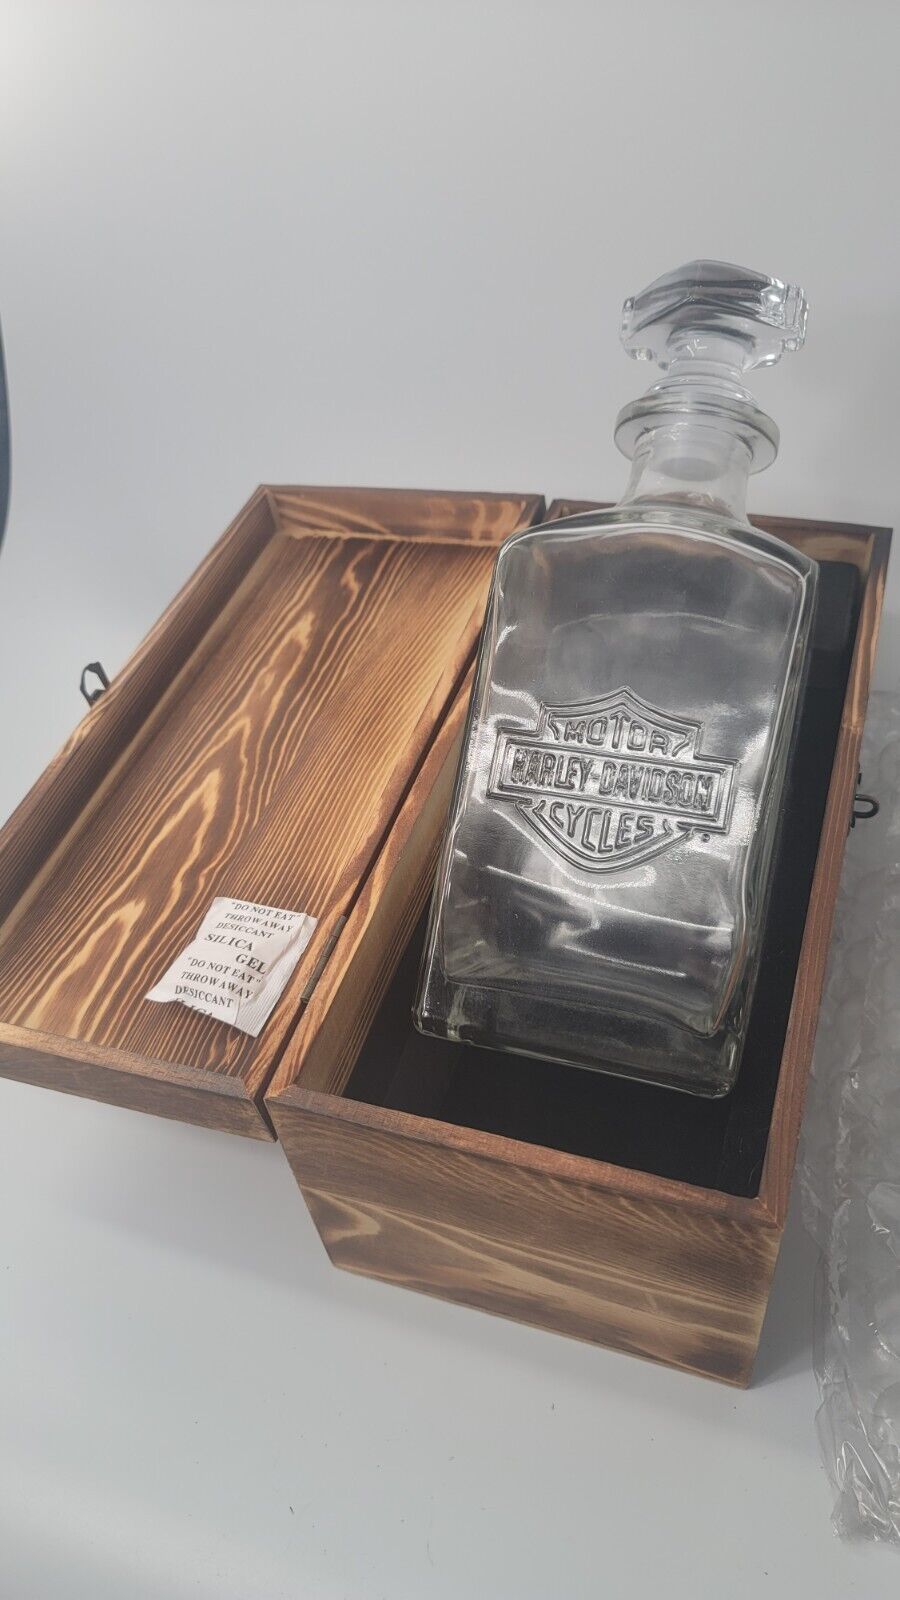 Harley-Davidson Glass Decanter in Wood Box - NEW OPEN BOX